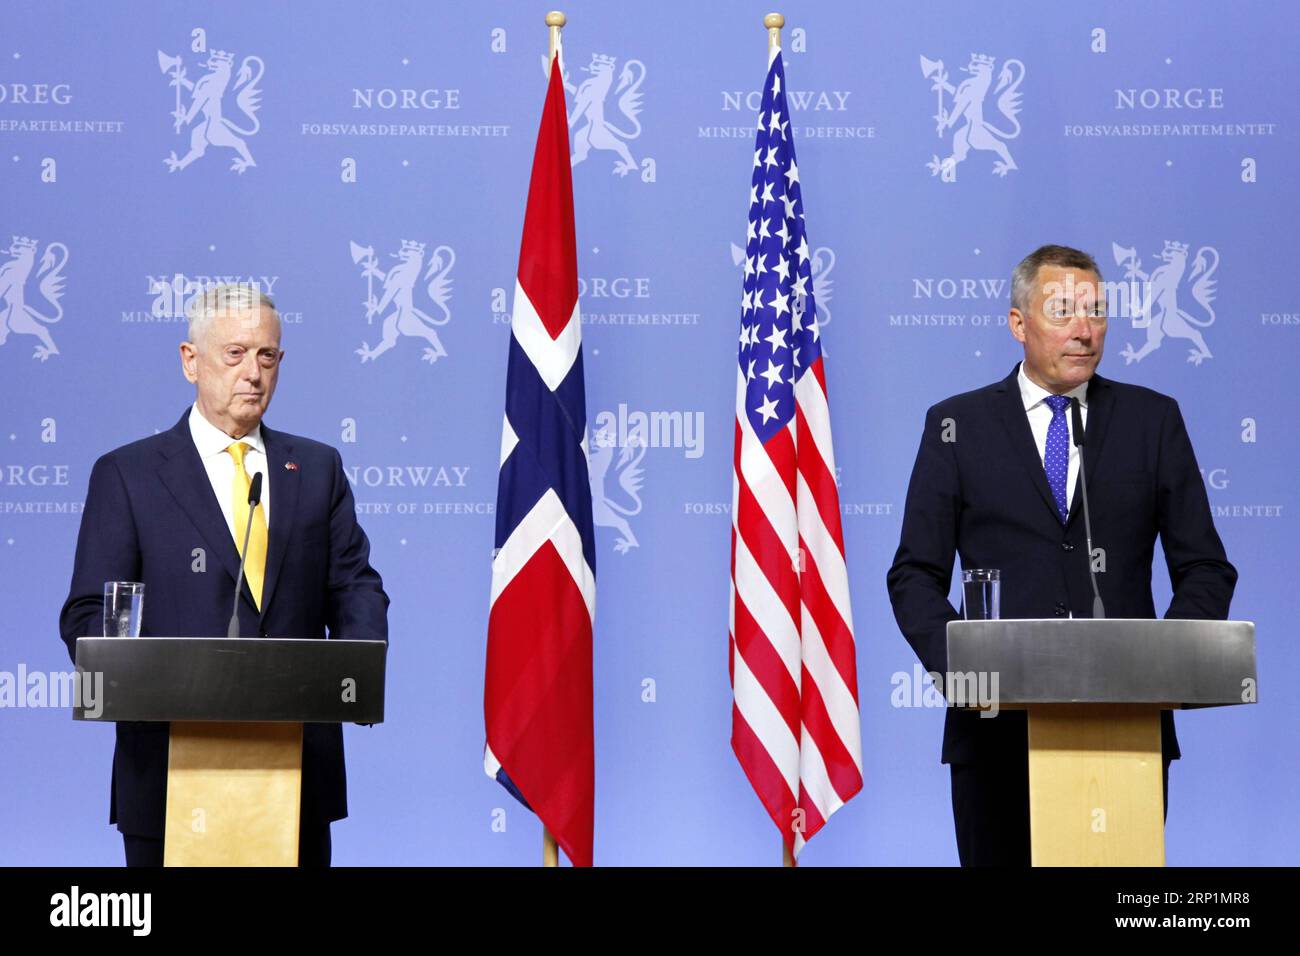 (180714) -- OSLO, July 14, 2018 -- U.S. Secretary of Defense James Mattis (L) attends a joint press conference with Norwegian Minister of Defence Frank Bakke-Jensen in Oslo, Norway, July 14, 2018. Norway on Saturday reconfirmed its commitment to gradually increase defense spending to two percent of GDP in the North Atlantic Treaty Organization (NATO) during a visit by U.S. Secretary of Defense James Mattis to the Nordic country. ) NORWAY-OSLO-U.S.-DEFENSE MINISTER-VISIT LiangxYouchang PUBLICATIONxNOTxINxCHN Stock Photo